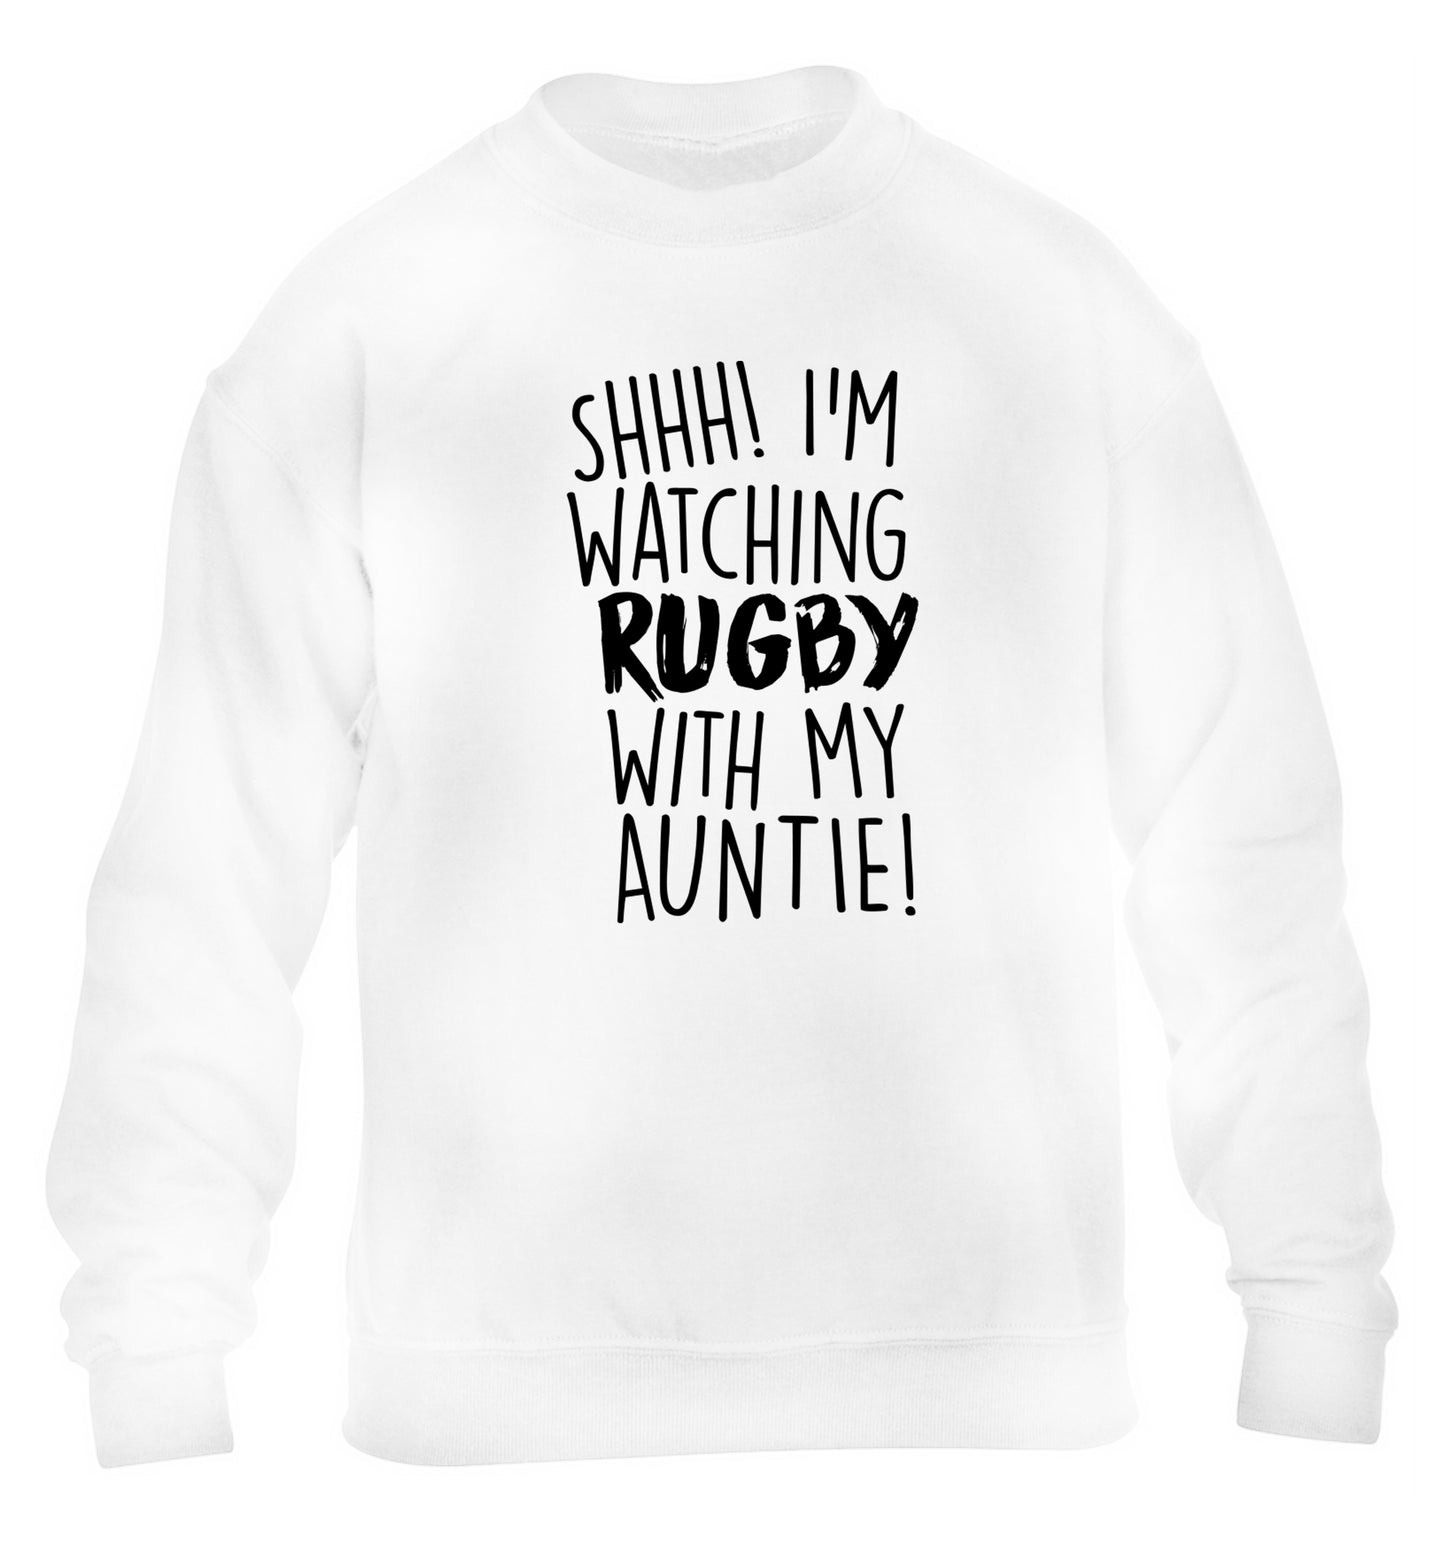 Shhh I'm watchin rugby with my auntie children's white sweater 12-13 Years